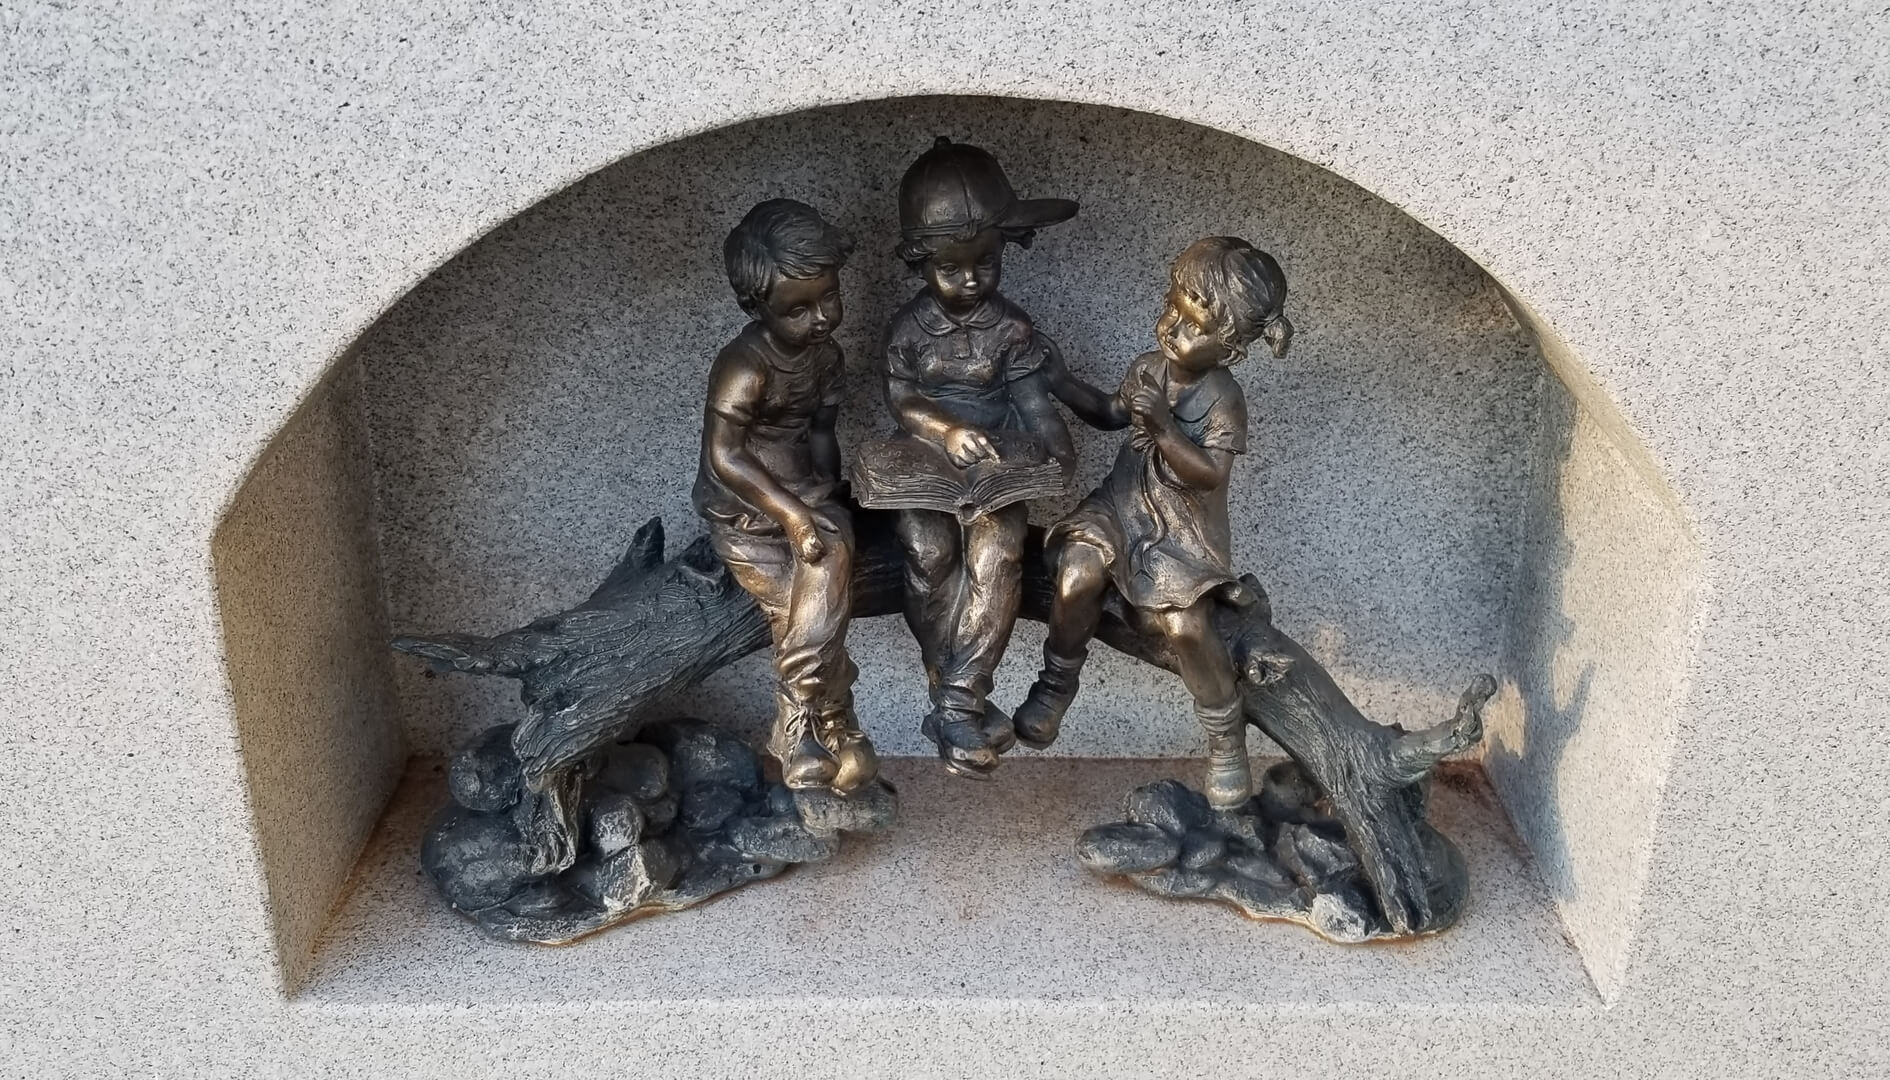 A beautiful statue of children sitting on a piece of log